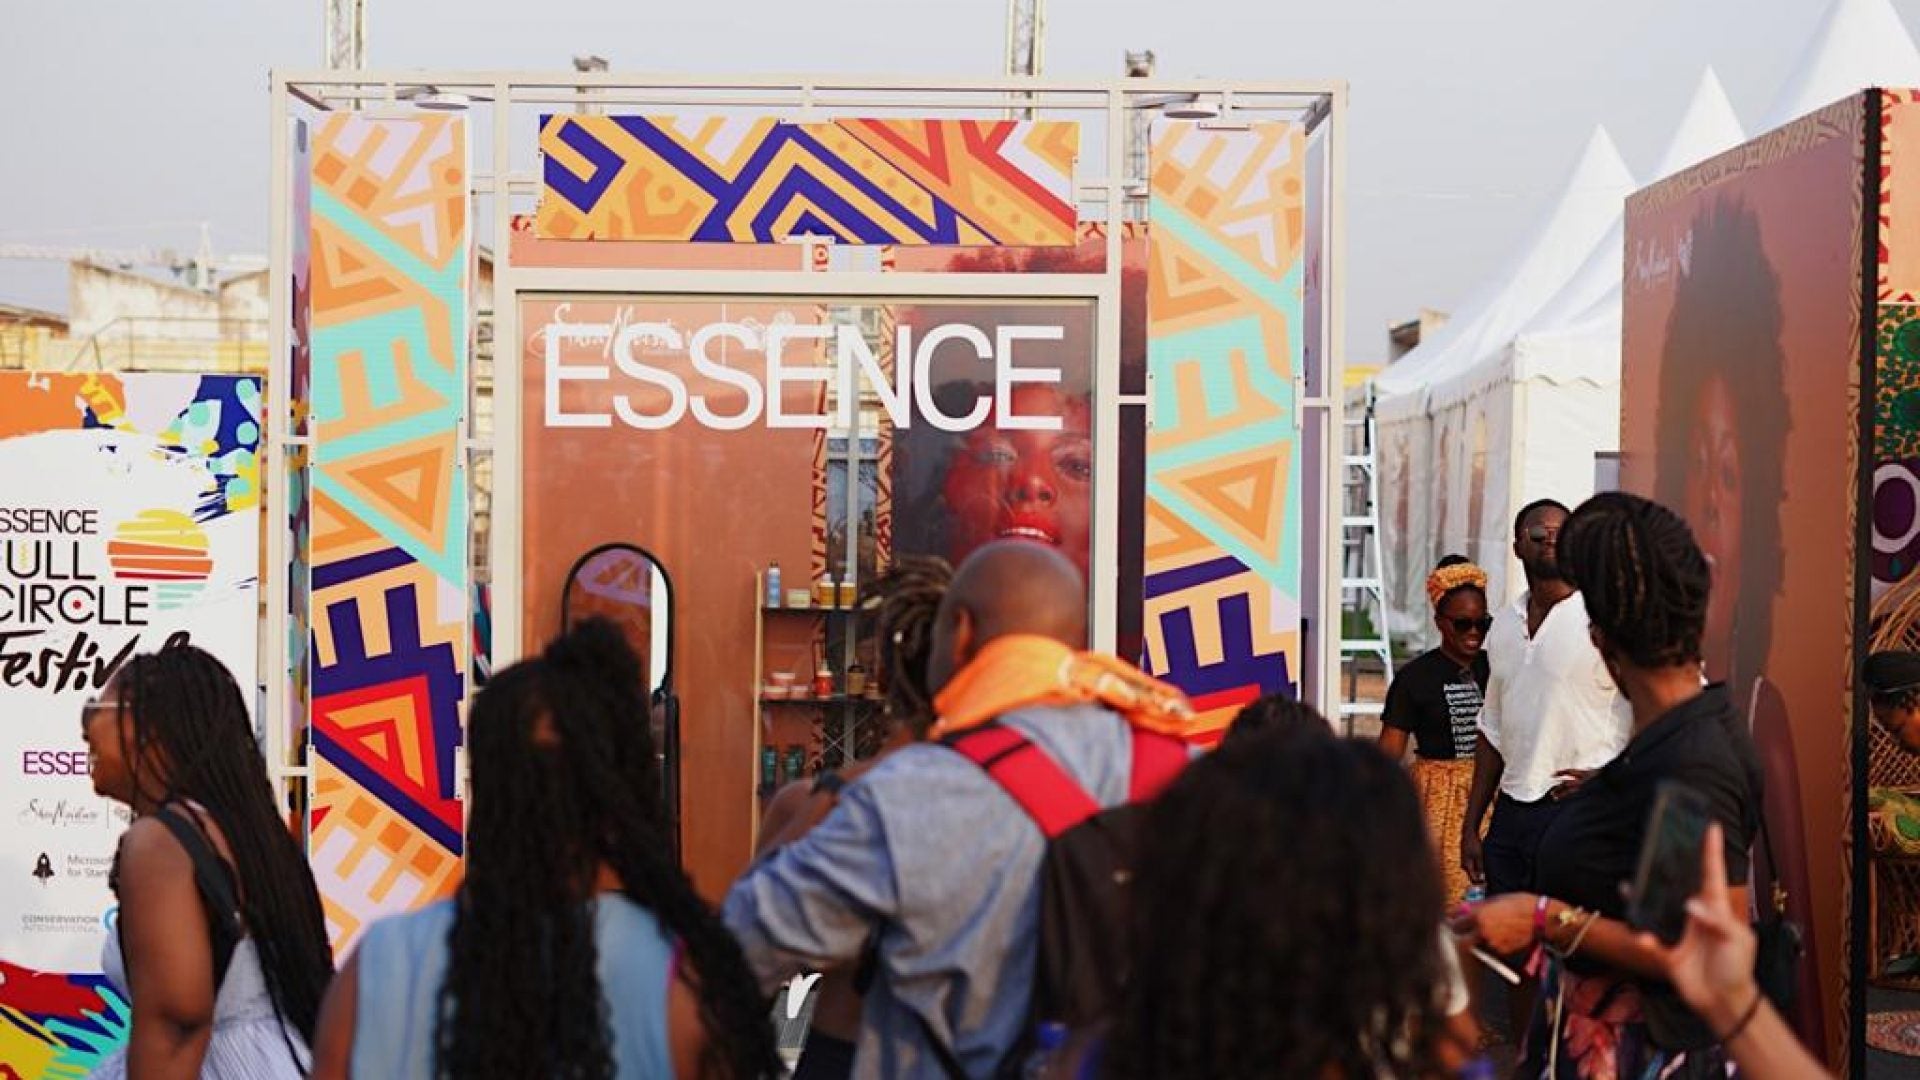 The First-Ever ESSENCE Full Circle Festival Kicks Off In Ghana To Close Out 2019